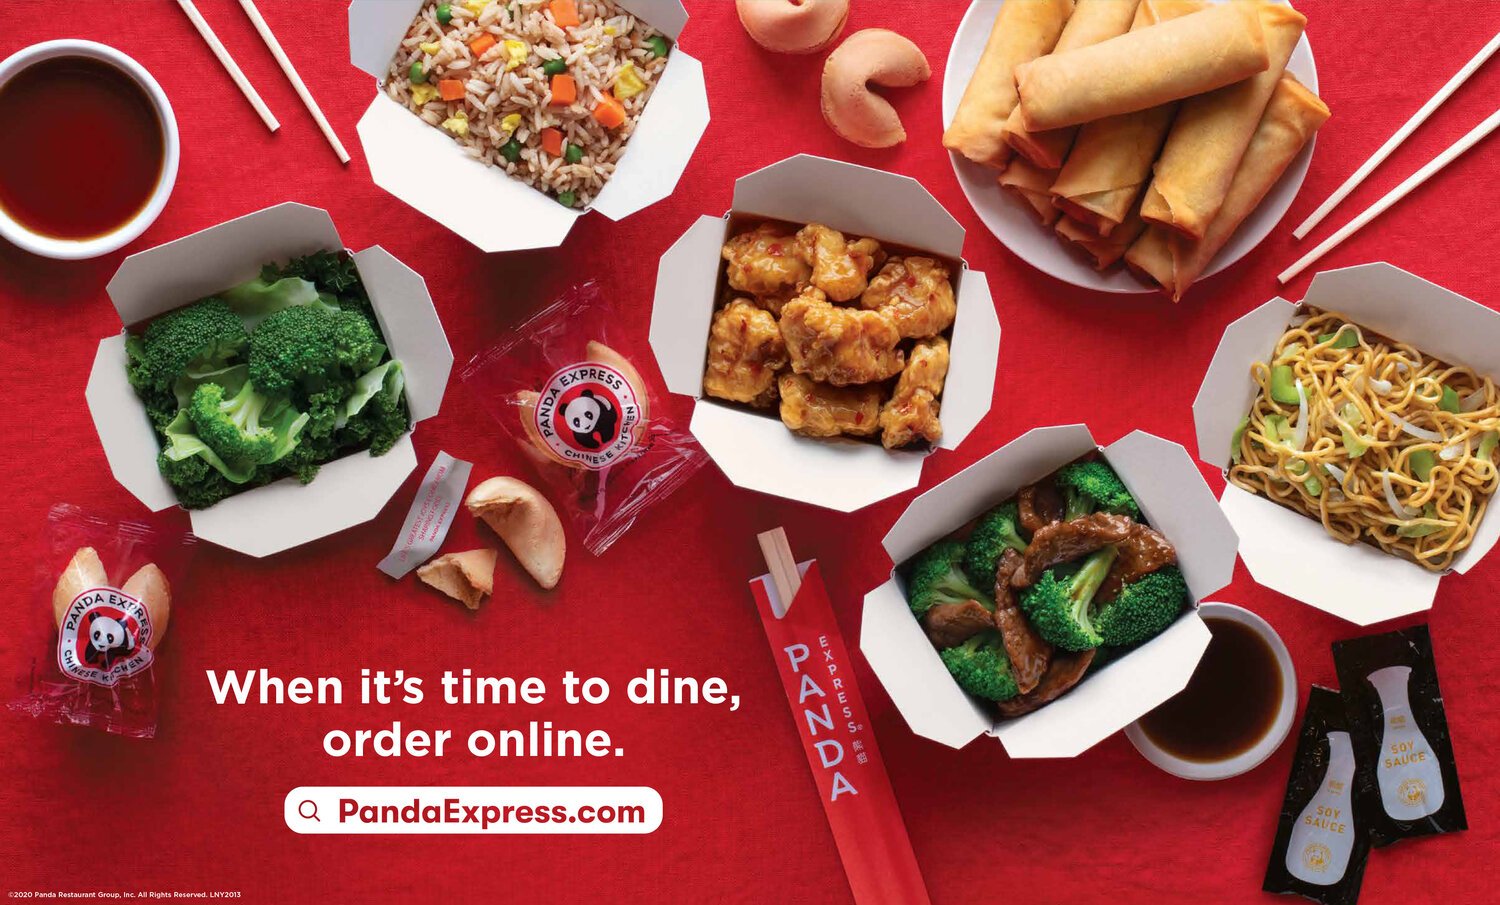 Panda Express Delicious American Chinese Cuisine Order Online Food Photographer_04.jpeg